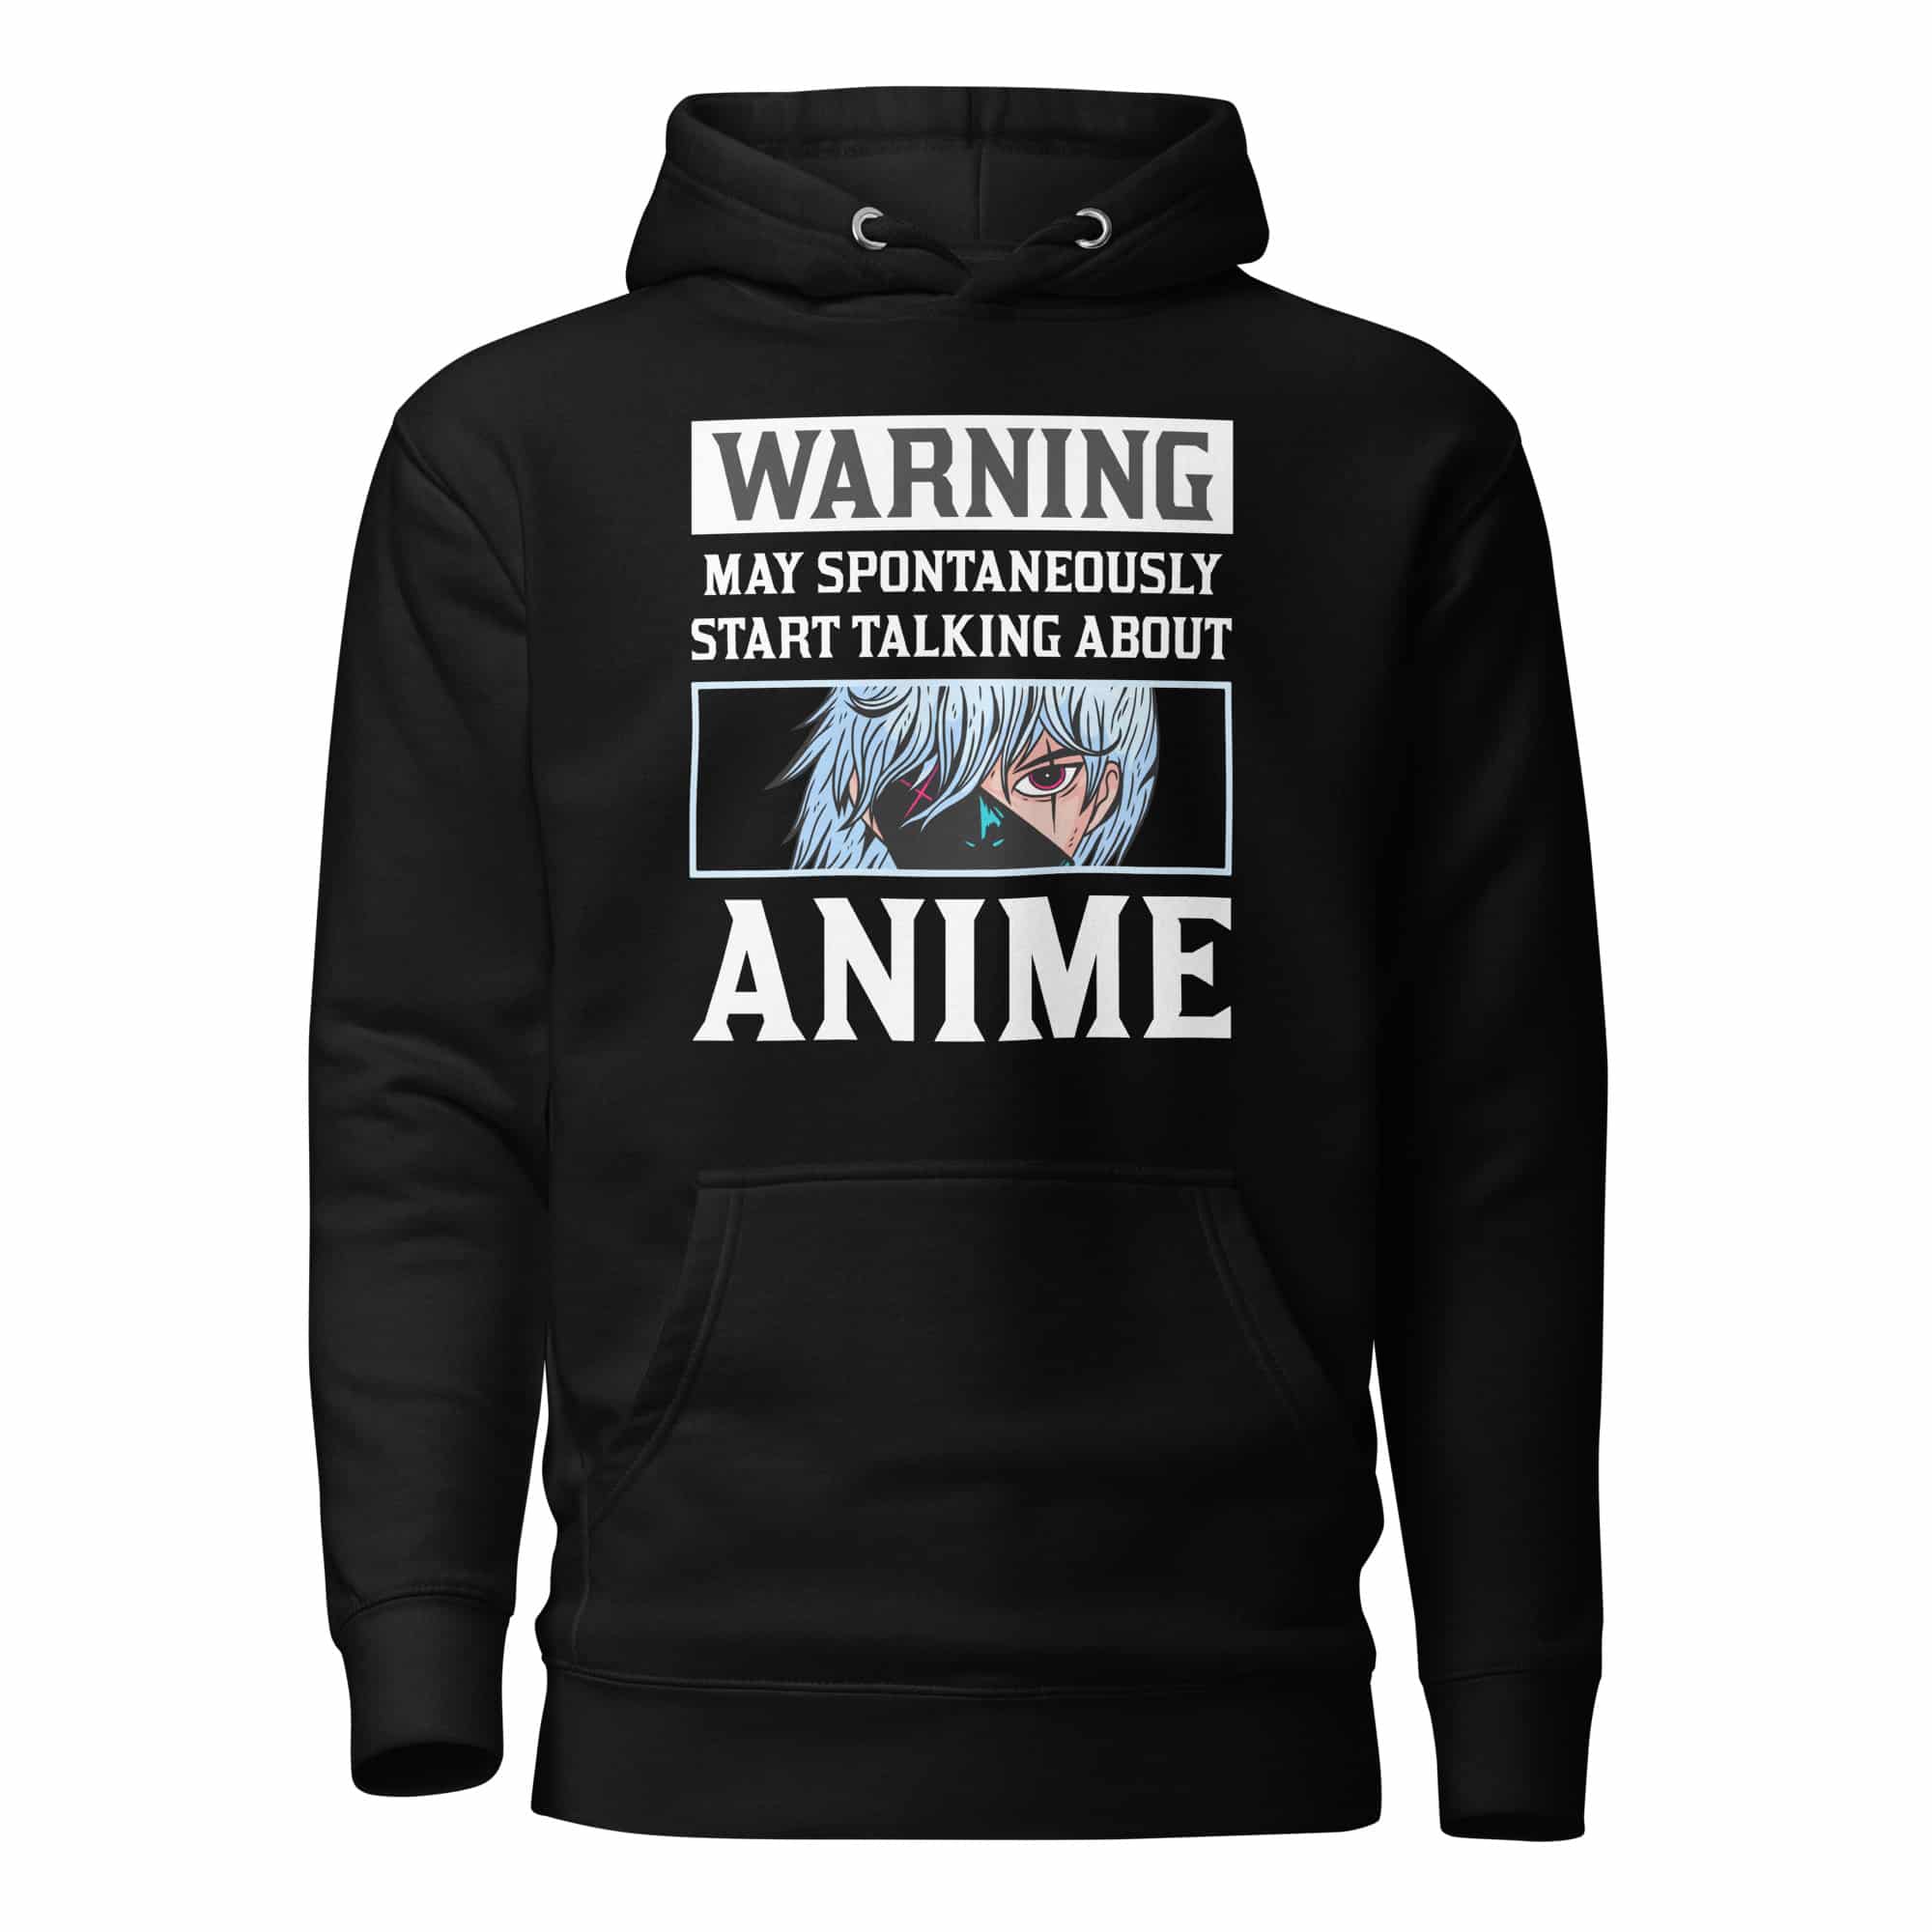 Warning May Talk About Anime Unisex Hoodie Video game store Gaming merchandise Gaming accessories shop Online gaming store Video game shop near me Gaming console store PC gaming store Gaming gear shop Retro gaming shop Board game shop Anime merchandise Anime store online Japanese anime shop Anime figurines Manga shop Anime DVDs Anime accessories Anime apparel Anime collectibles Anime gifts